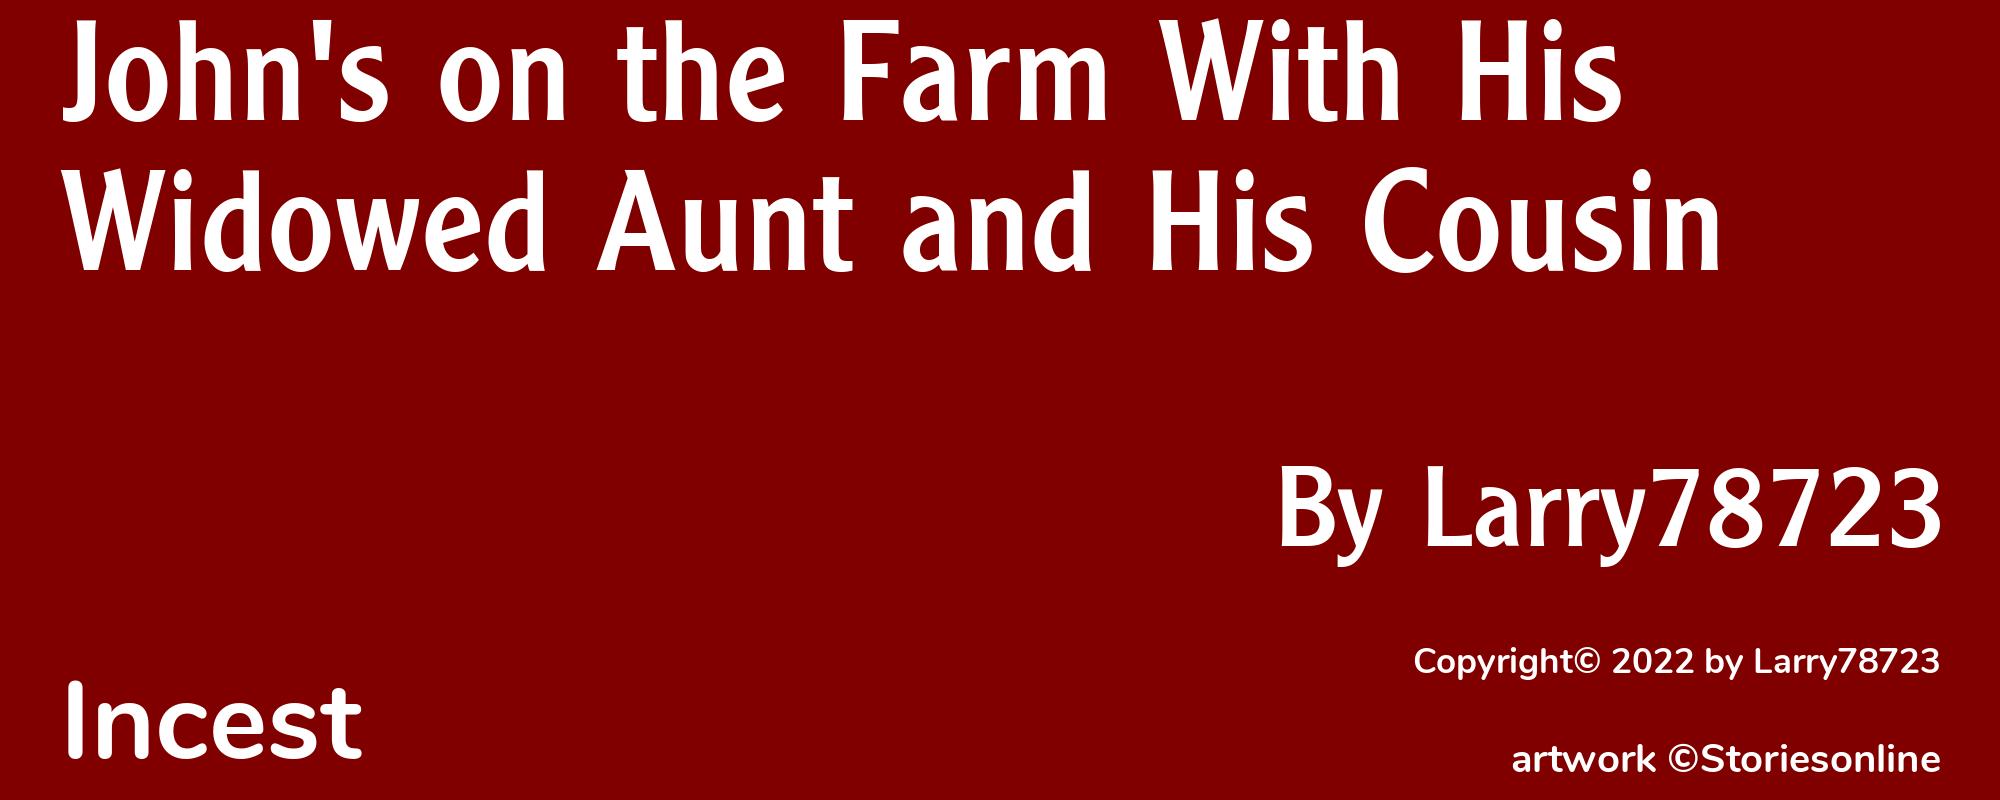 John's on the Farm With His Widowed Aunt and His Cousin - Cover